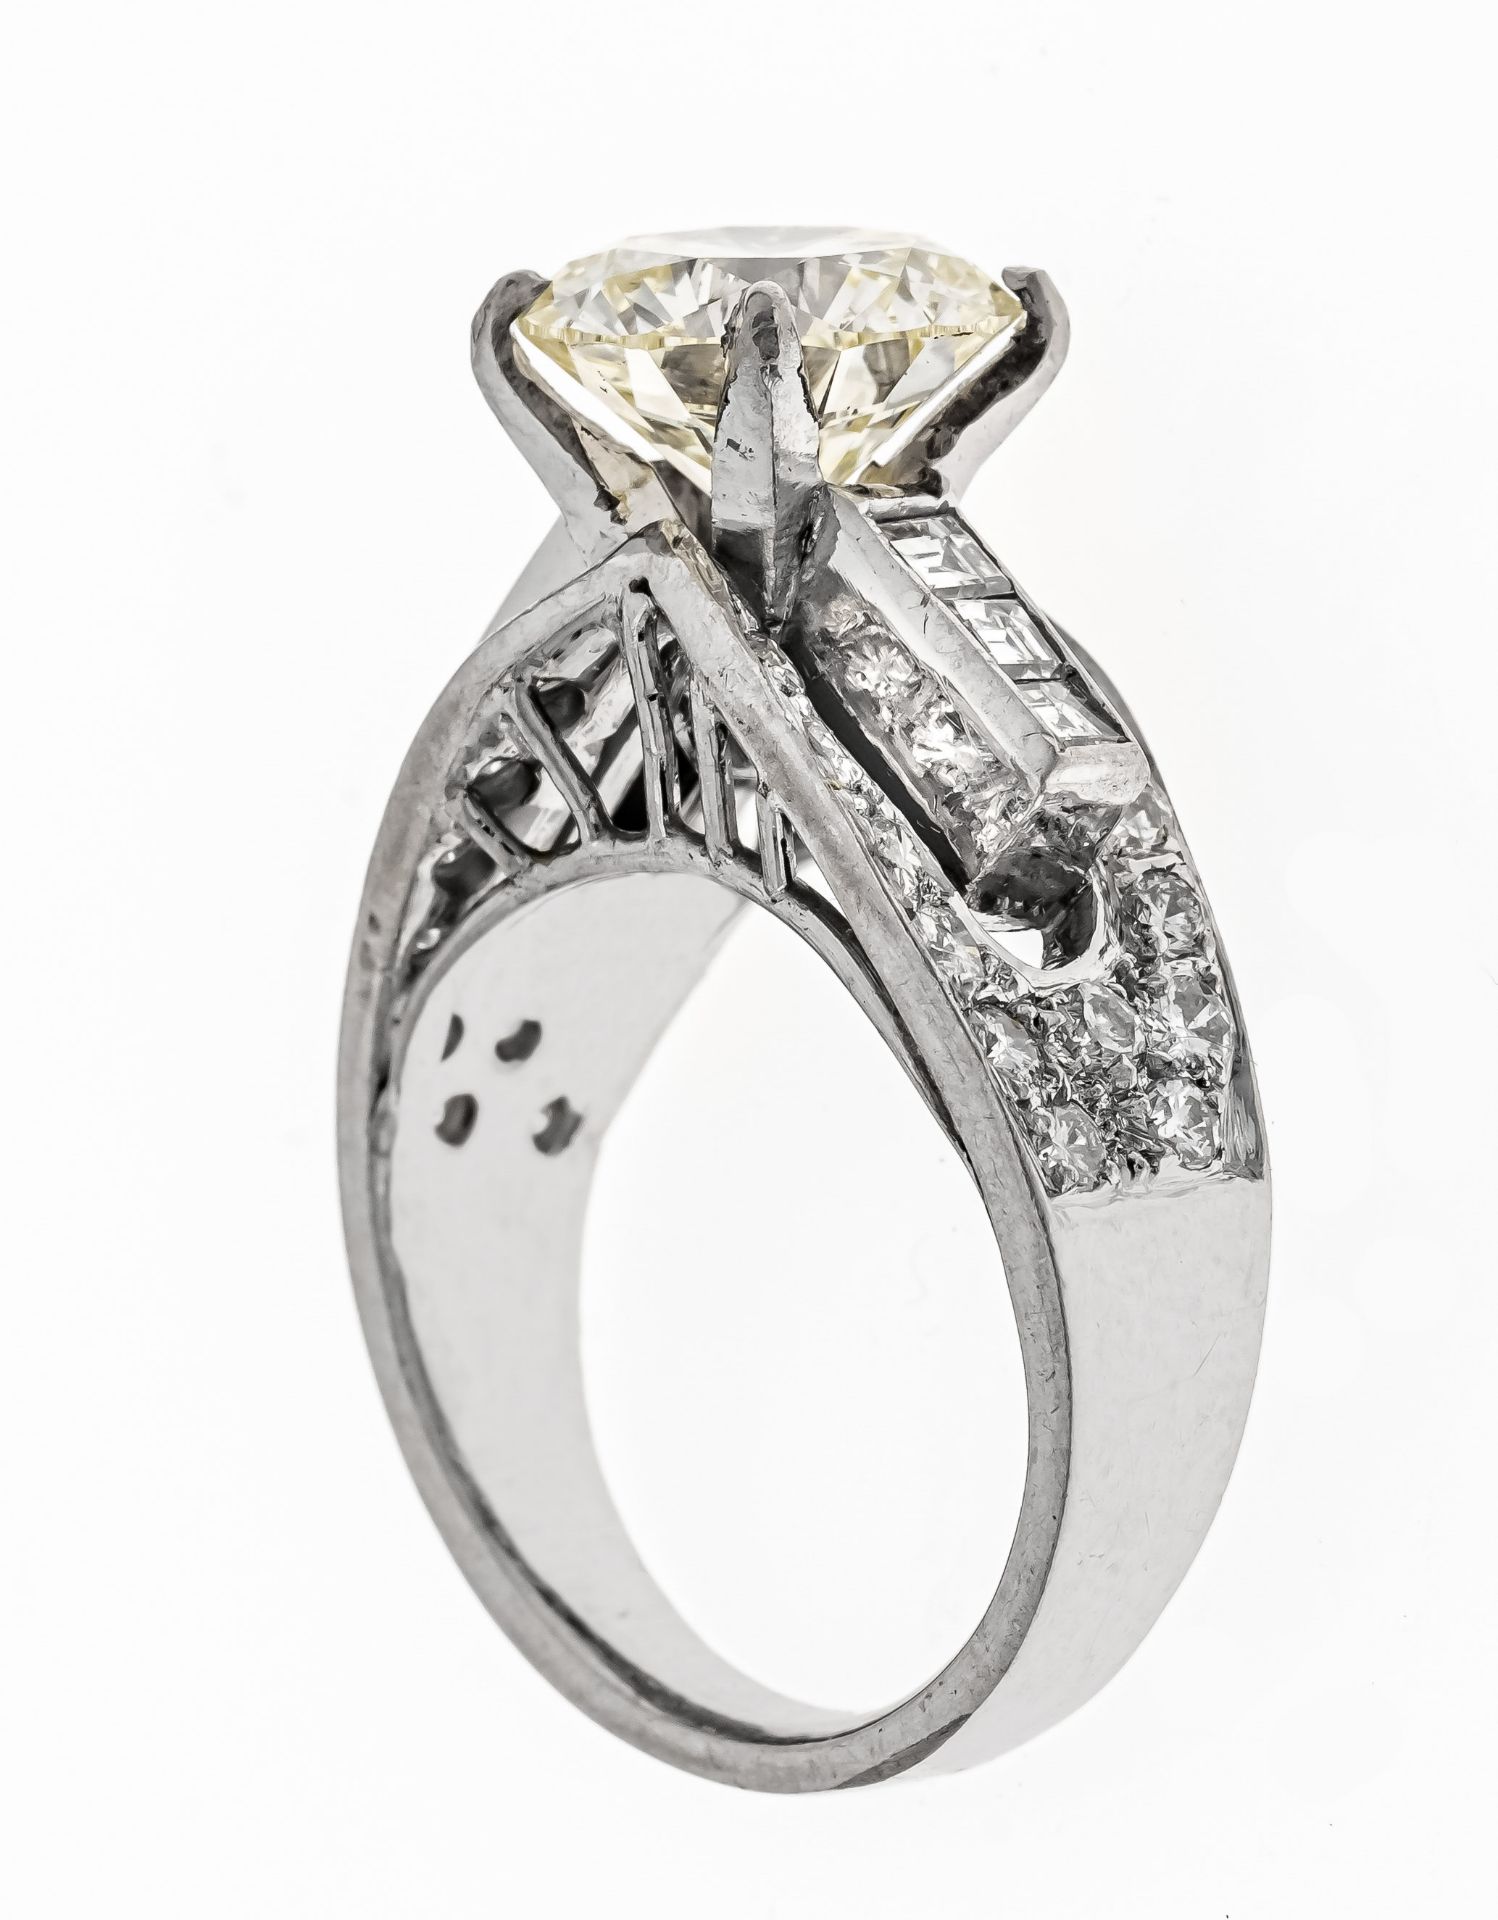 Brilliant-solitary ring WG 585/000 unstamped, tested, with one brilliant-cut diamond 3,40 ct Fancy - Image 2 of 5